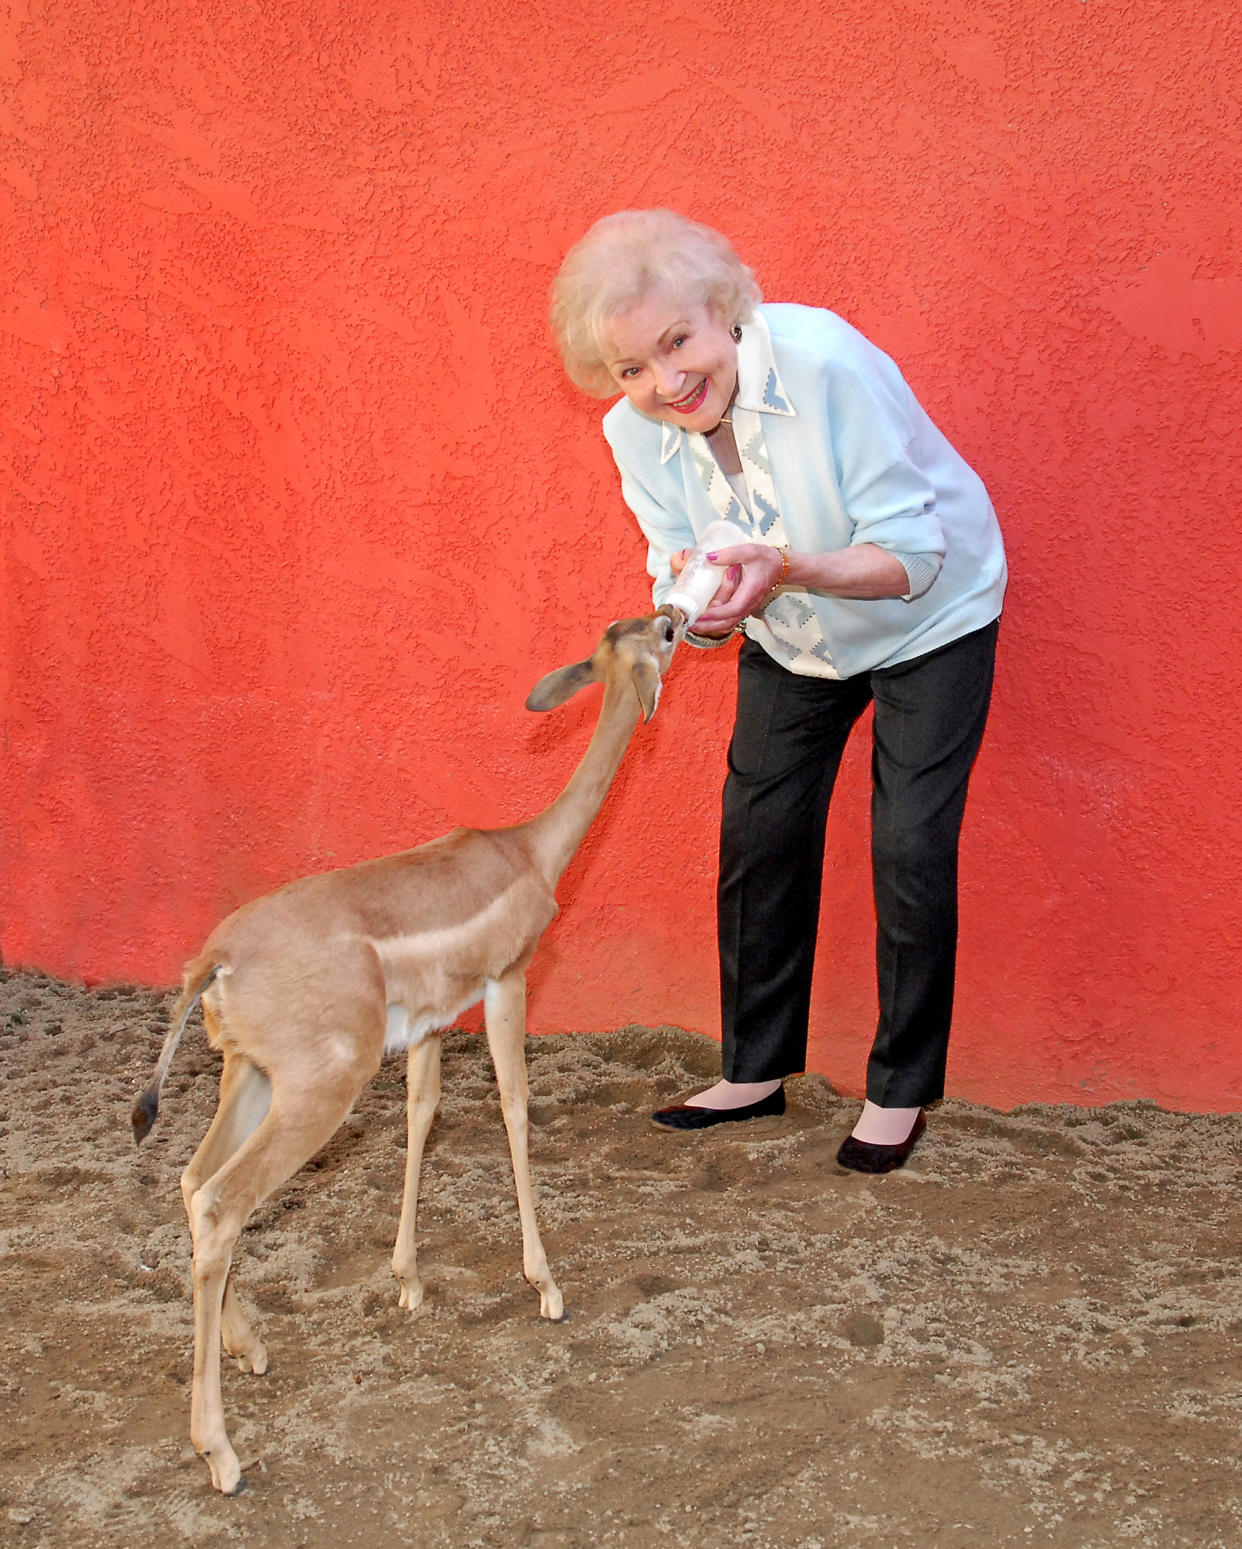 Betty White feeds a gerenuk, a medium-sized gazelle, at the L.A. Zoo. She frequently reminded viewers of her 1971 TV series “Betty White’s Pet Set” that wild animals should not be kept as pets.  (Tad Motoyama / Greater Los Angeles Zoo Association)